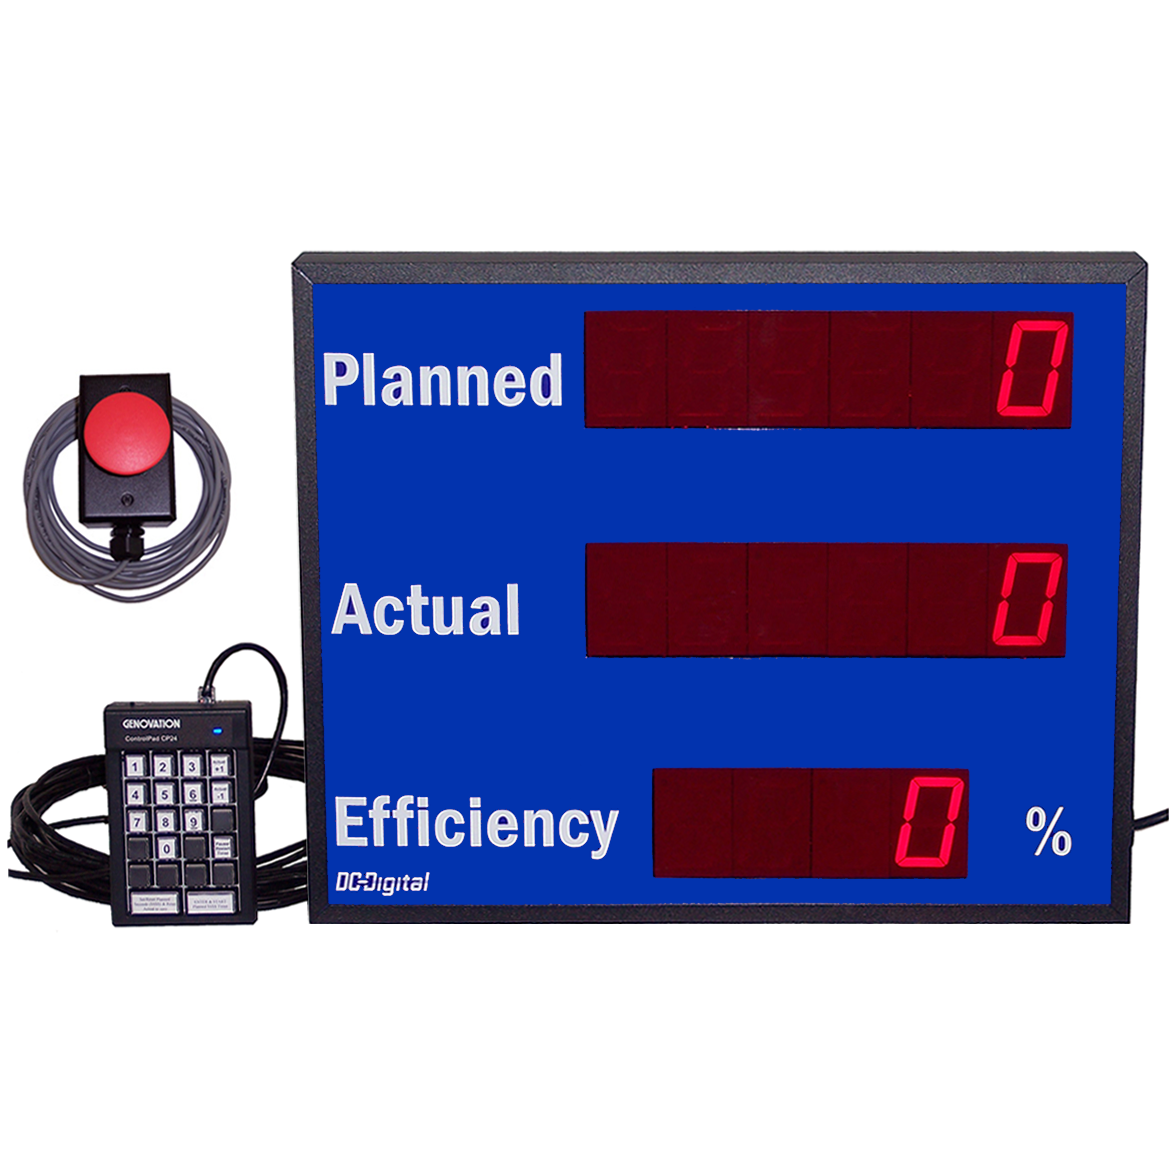 (DC-256C-2-EFF-KEY-PACE-RP) (6) Digit, 2.3 Inch LED Digital Production Pace Efficiency Counter/Timer with Multi-Input Controls for Actual Count Pace and 24 Keypad Input for Setting, Starting, and Pausing the Planned Count Pace (Measures Pieces per Second or Pieces per Minute or Seconds per Piece)